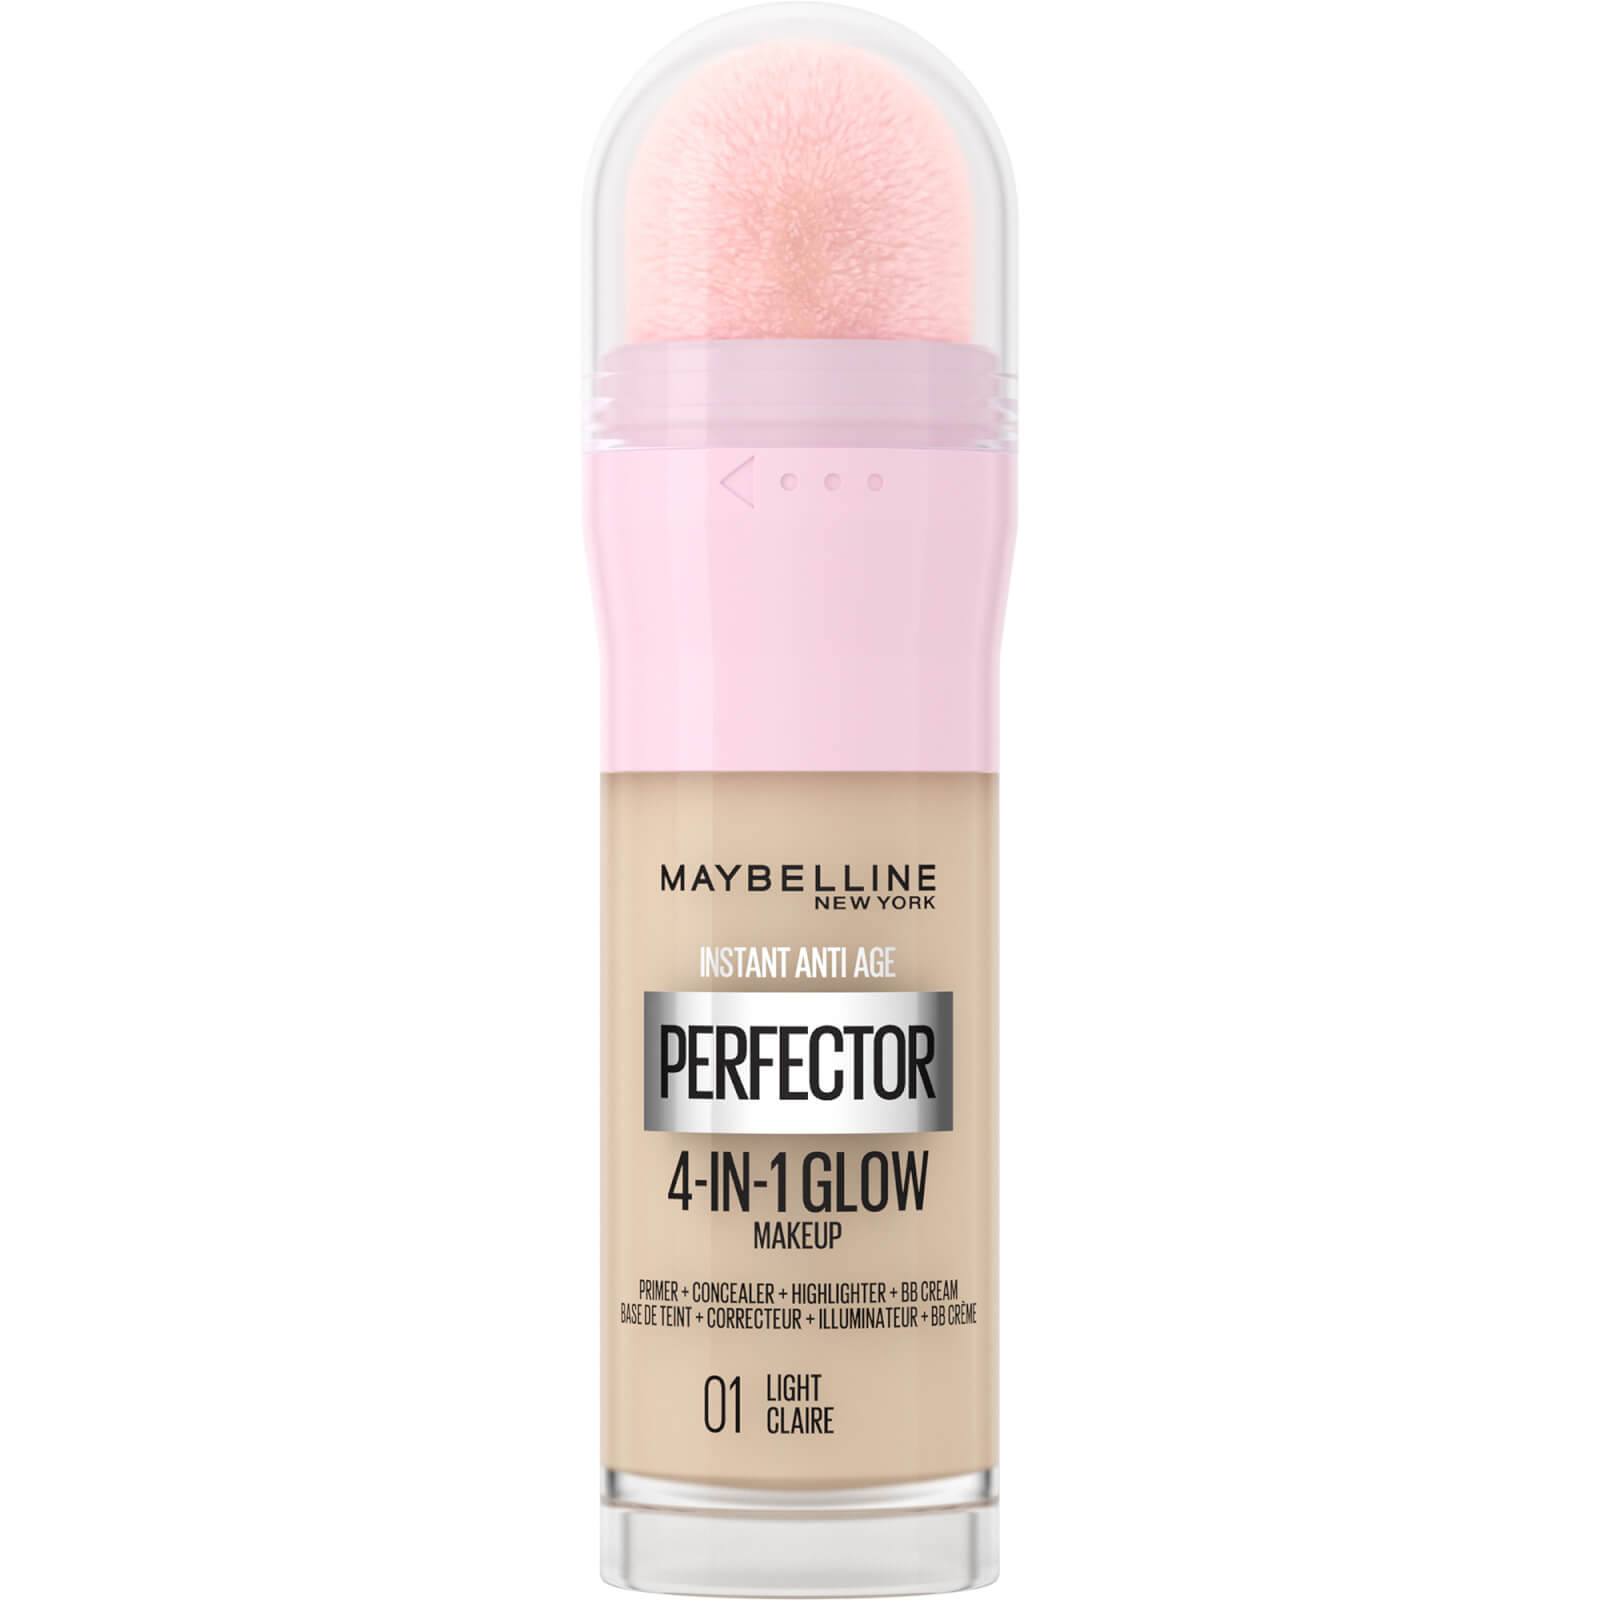 Maybelline instant Anti Age Perfector 4-in-1 Glow Concealer 118ml (Various Shades) - Light